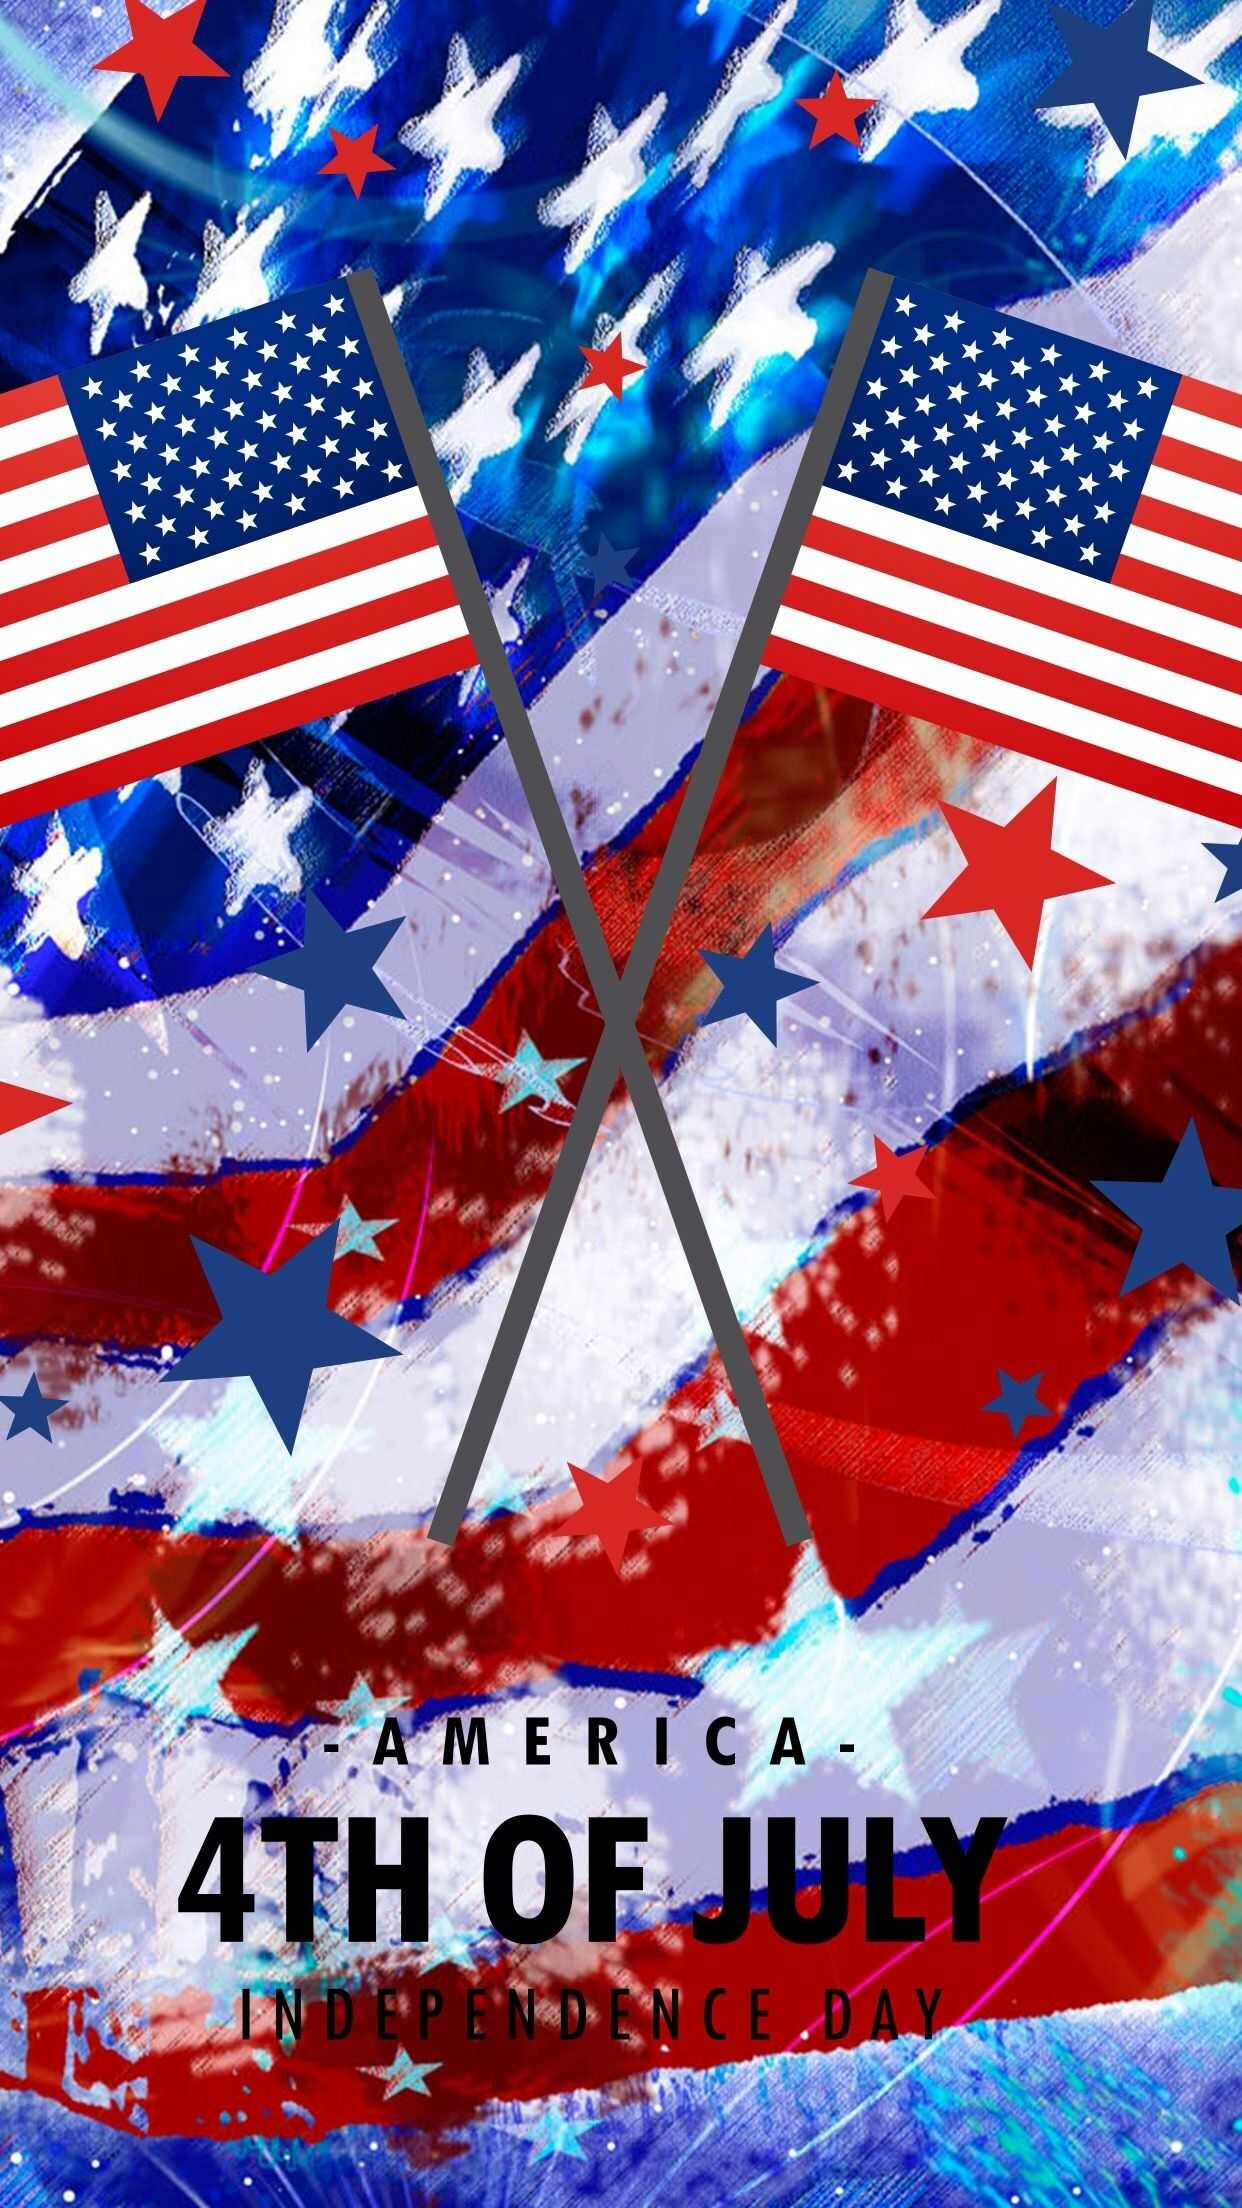 4th of July: Holiday celebrating the birth of the United States of America as an independent nation. 1250x2210 HD Background.